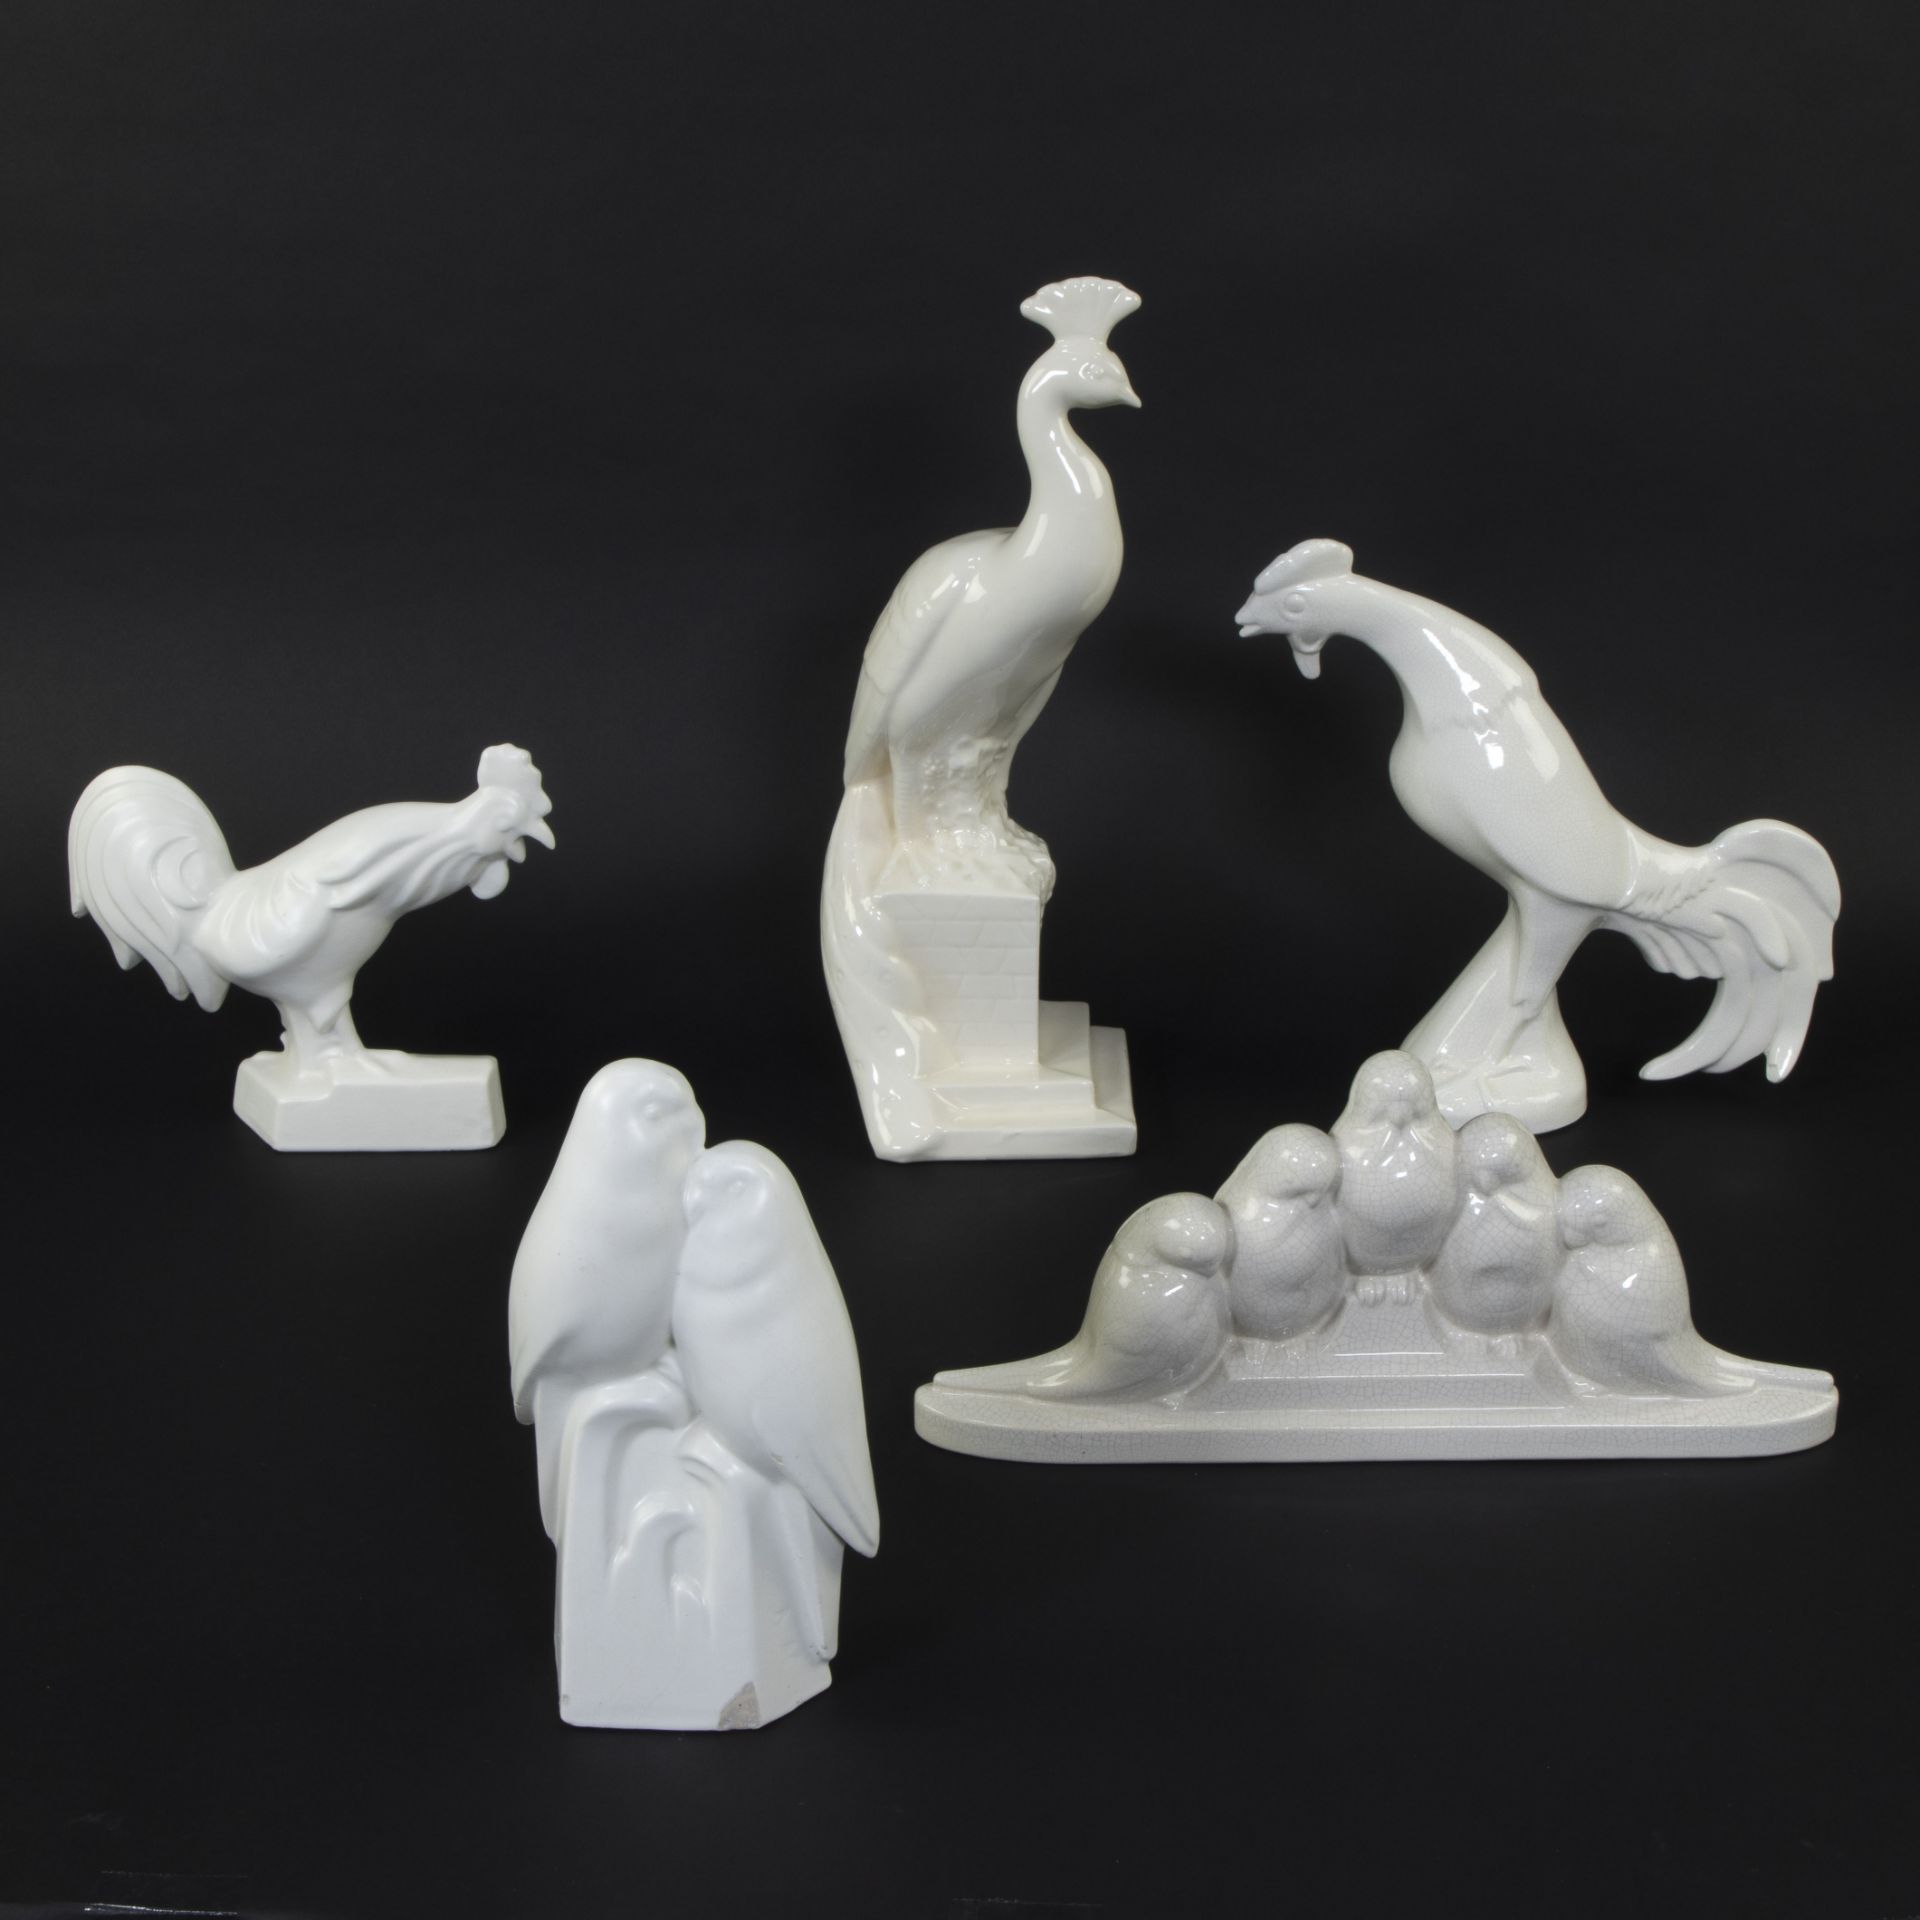 Collection of Art Deco sculptures of crackled ceramics, pair of birds, rooster with chicks, peacock